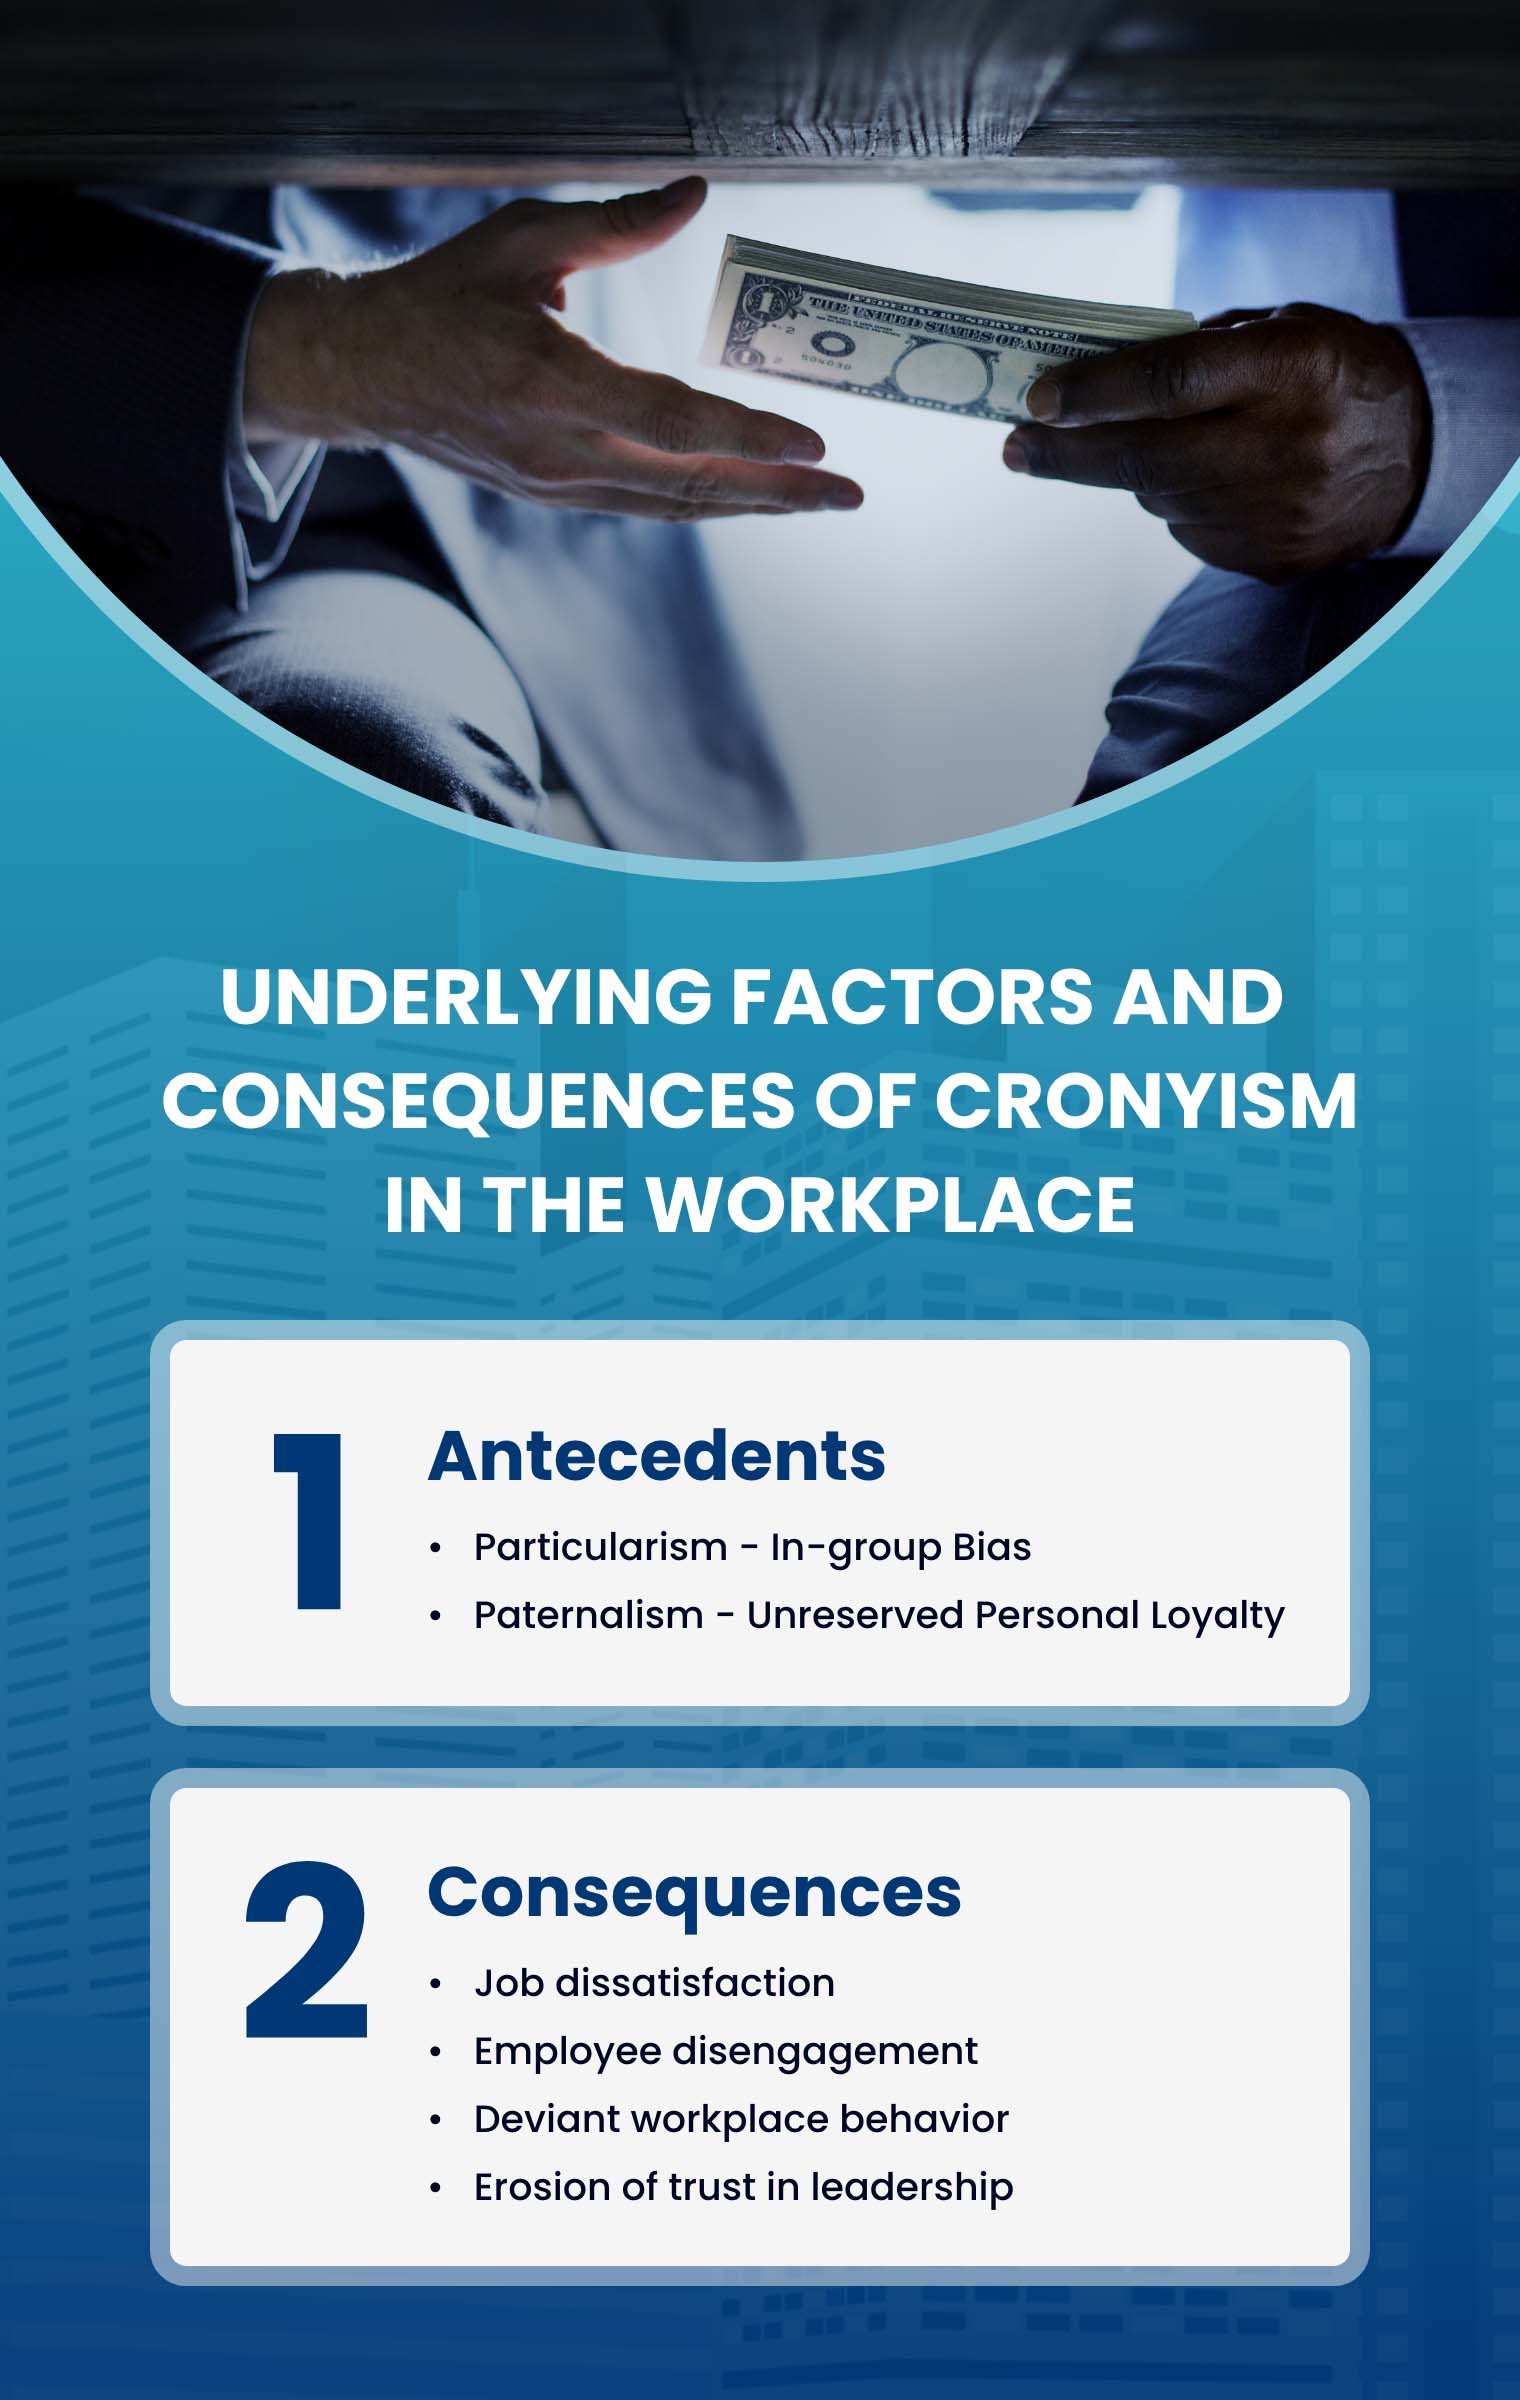 Underlying Factors and Consequences of Cronyism in the Workplace